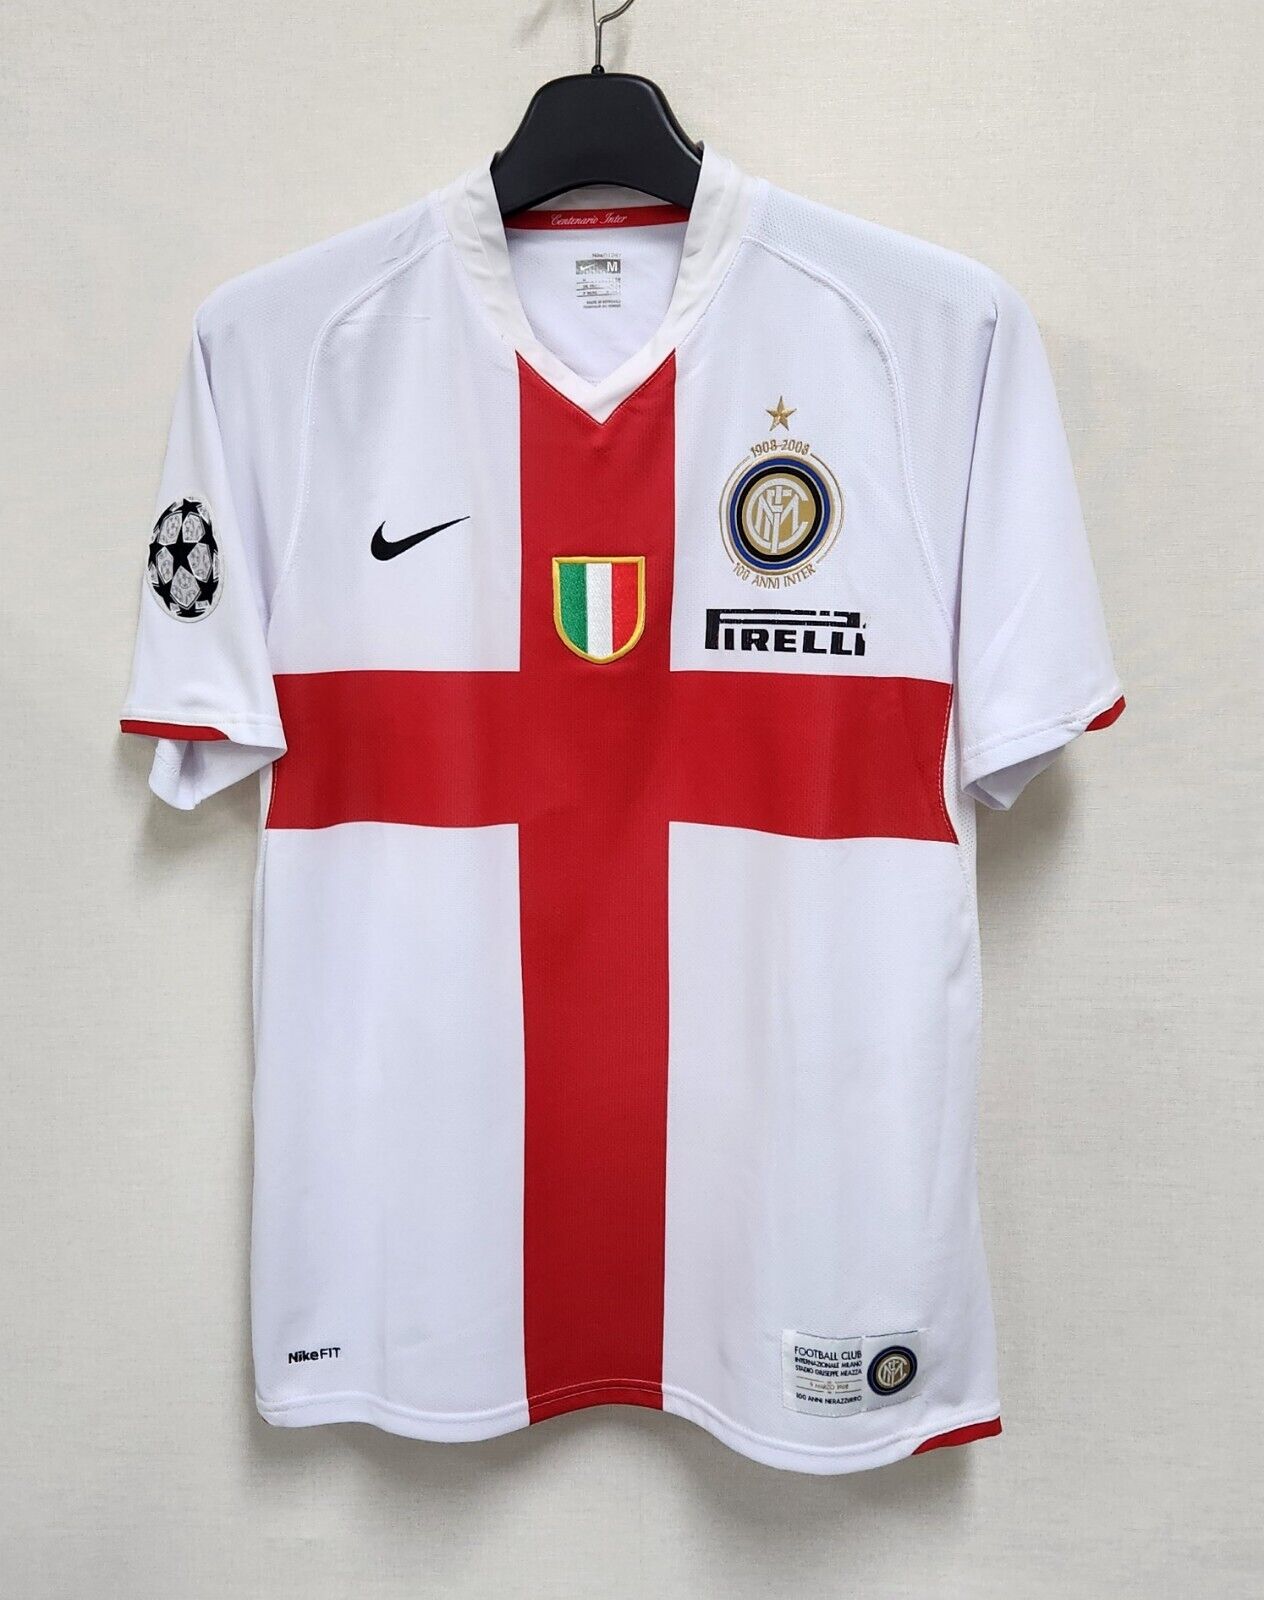 07-08 Inter Milan Retro Jersey (UCL PATCHES)